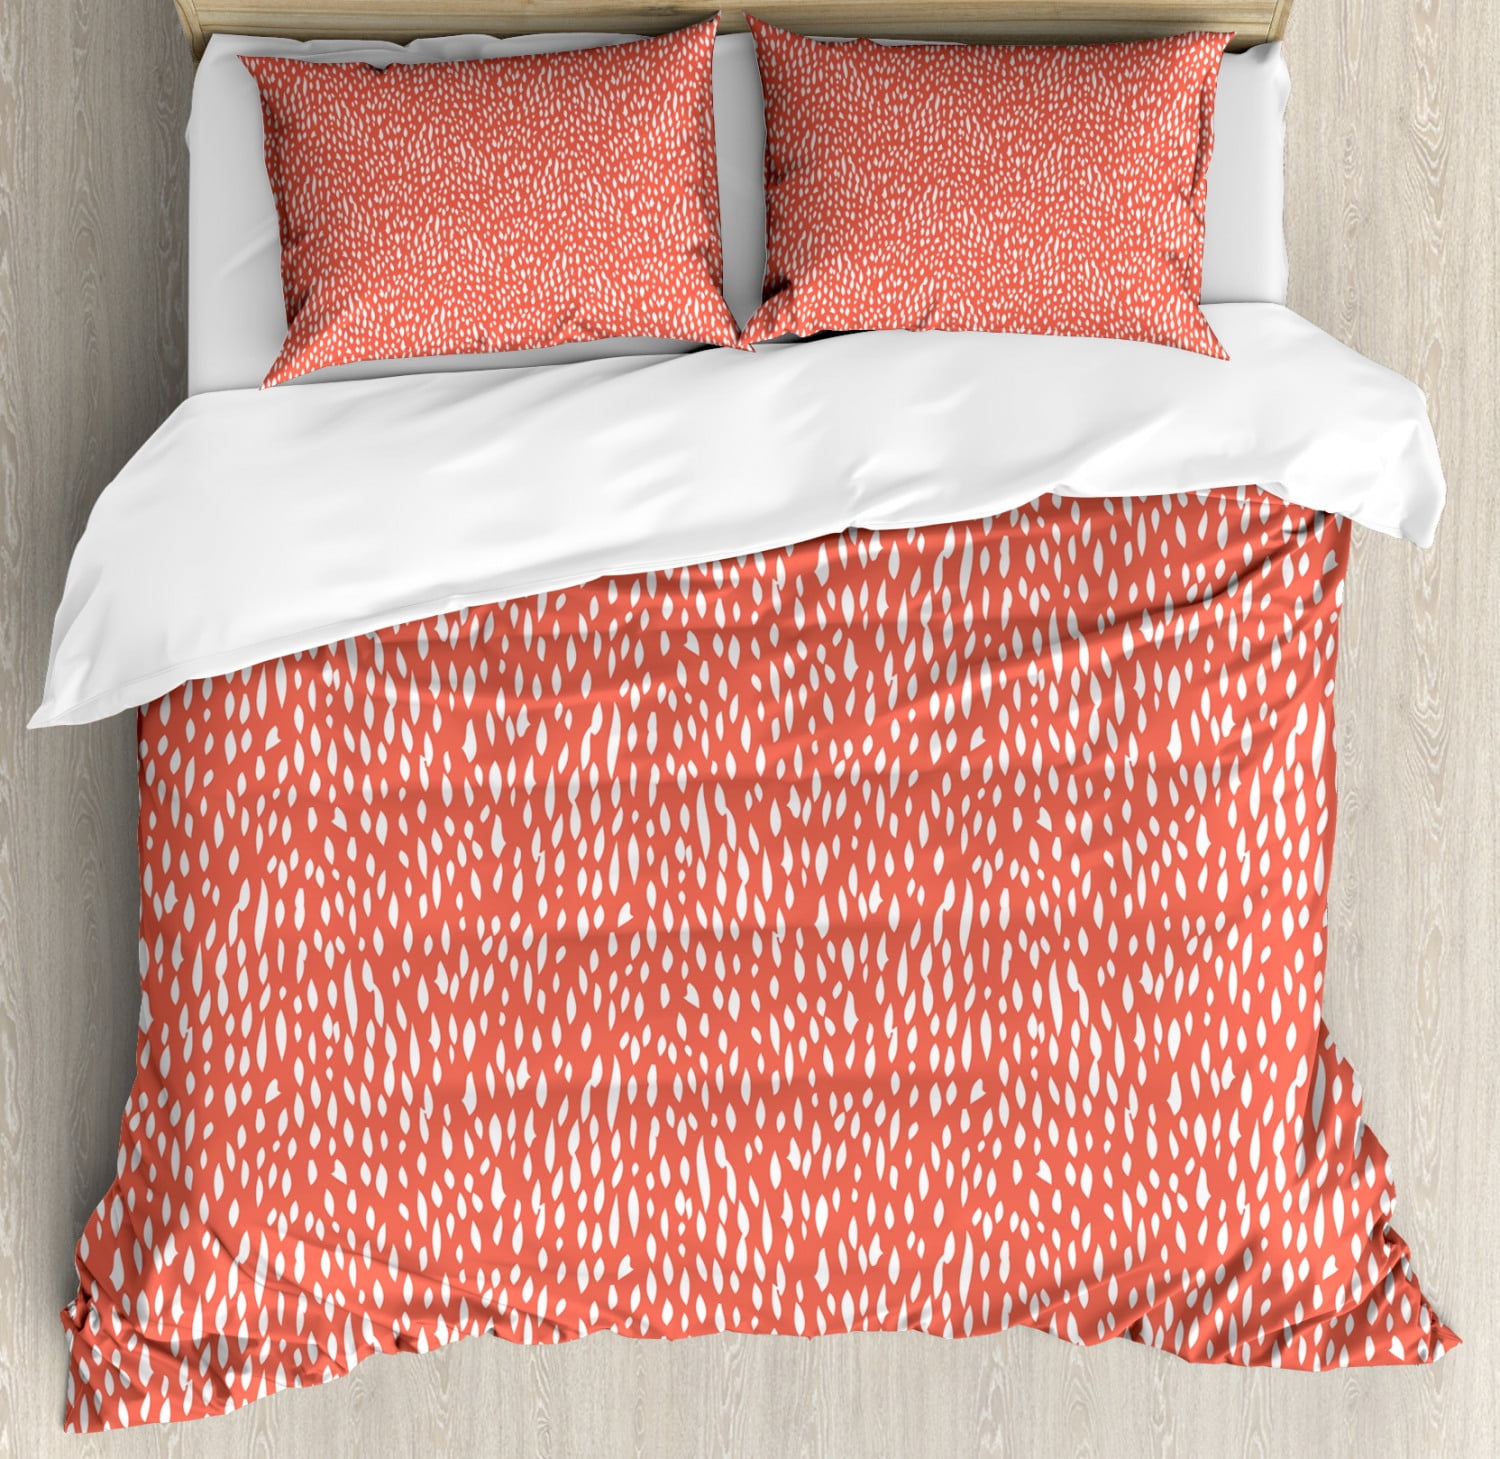 Coral And White Duvet Cover Set King Size Hand Drawn Strokes